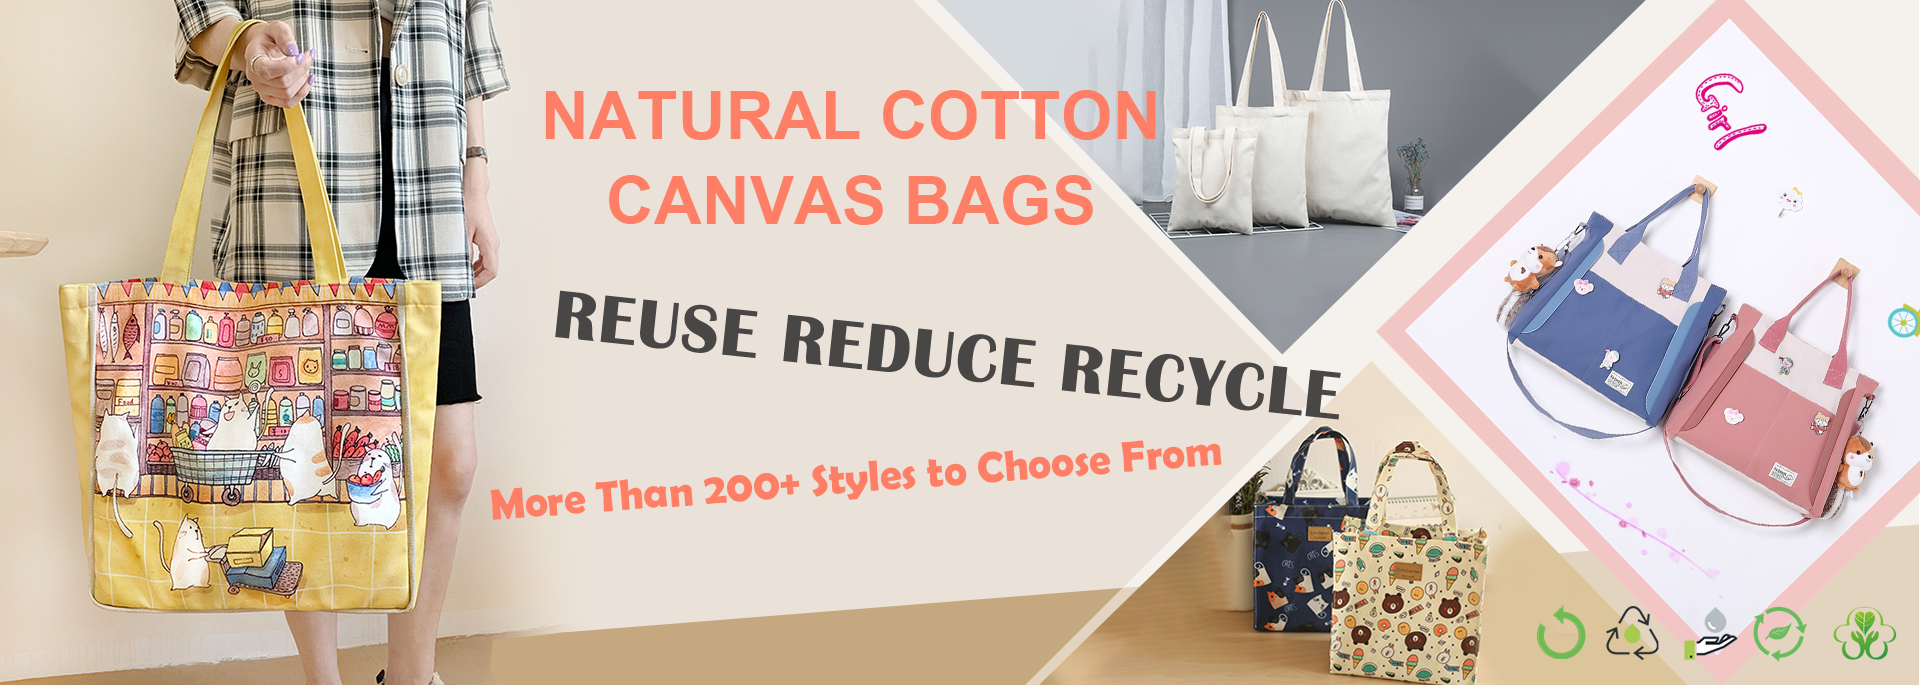 canvas bags ad